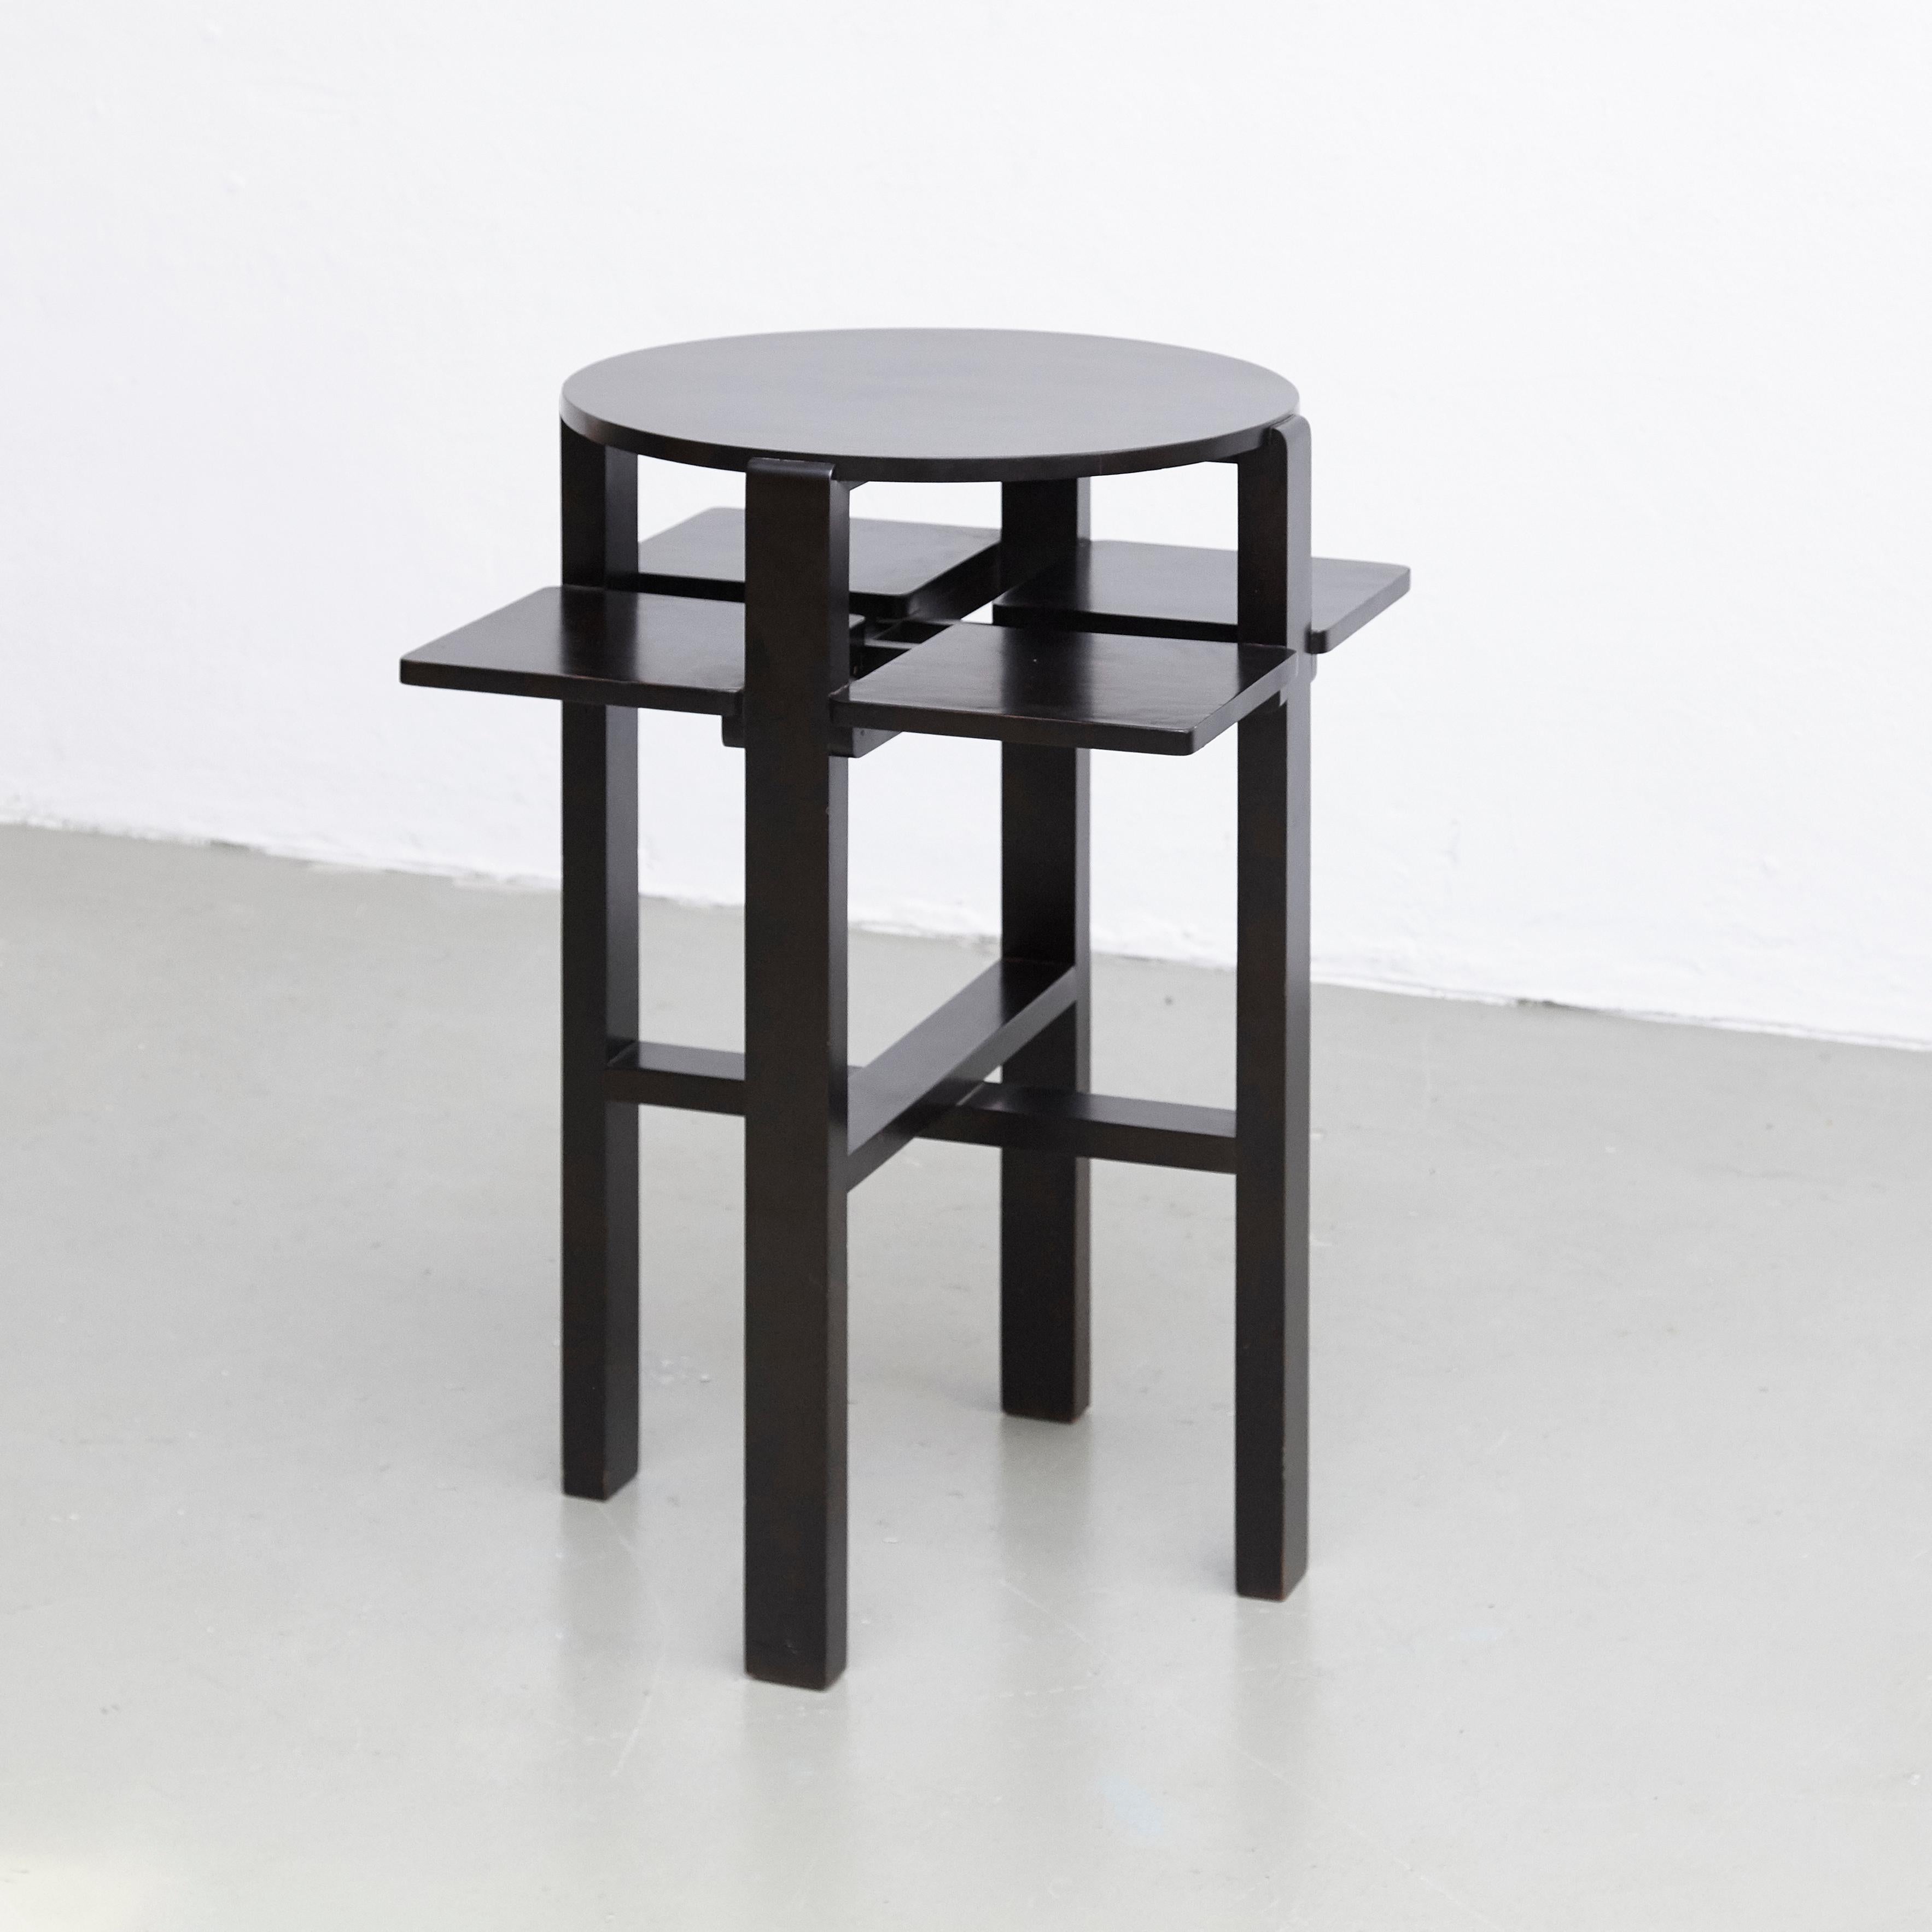 Lacquered Charles Rennie Mackintosh Domino Side Table